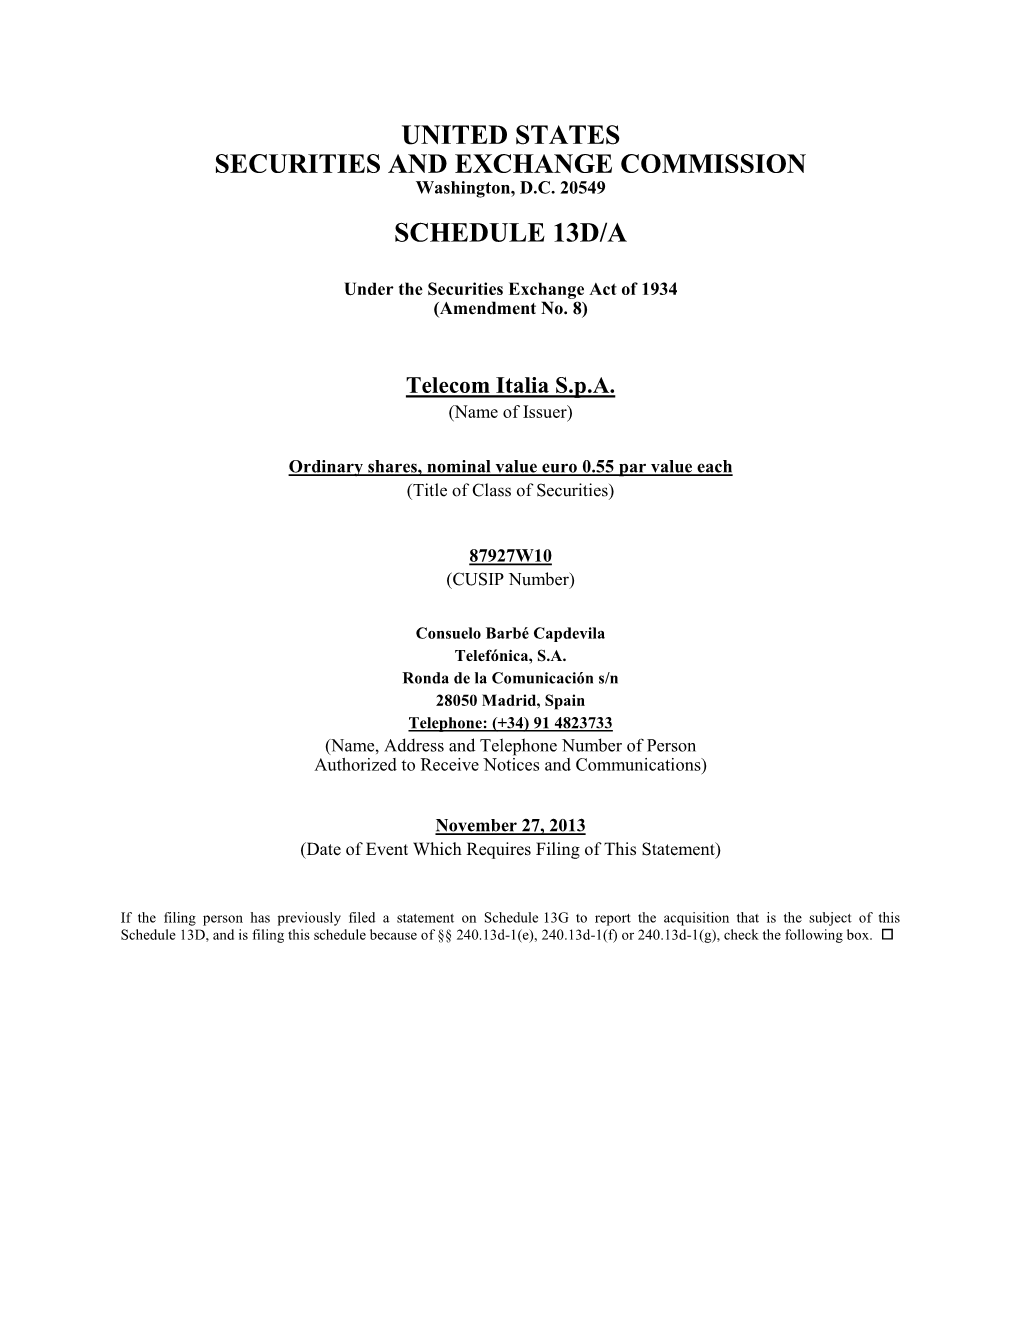 United States Securities and Exchange Commission Schedule 13D/A